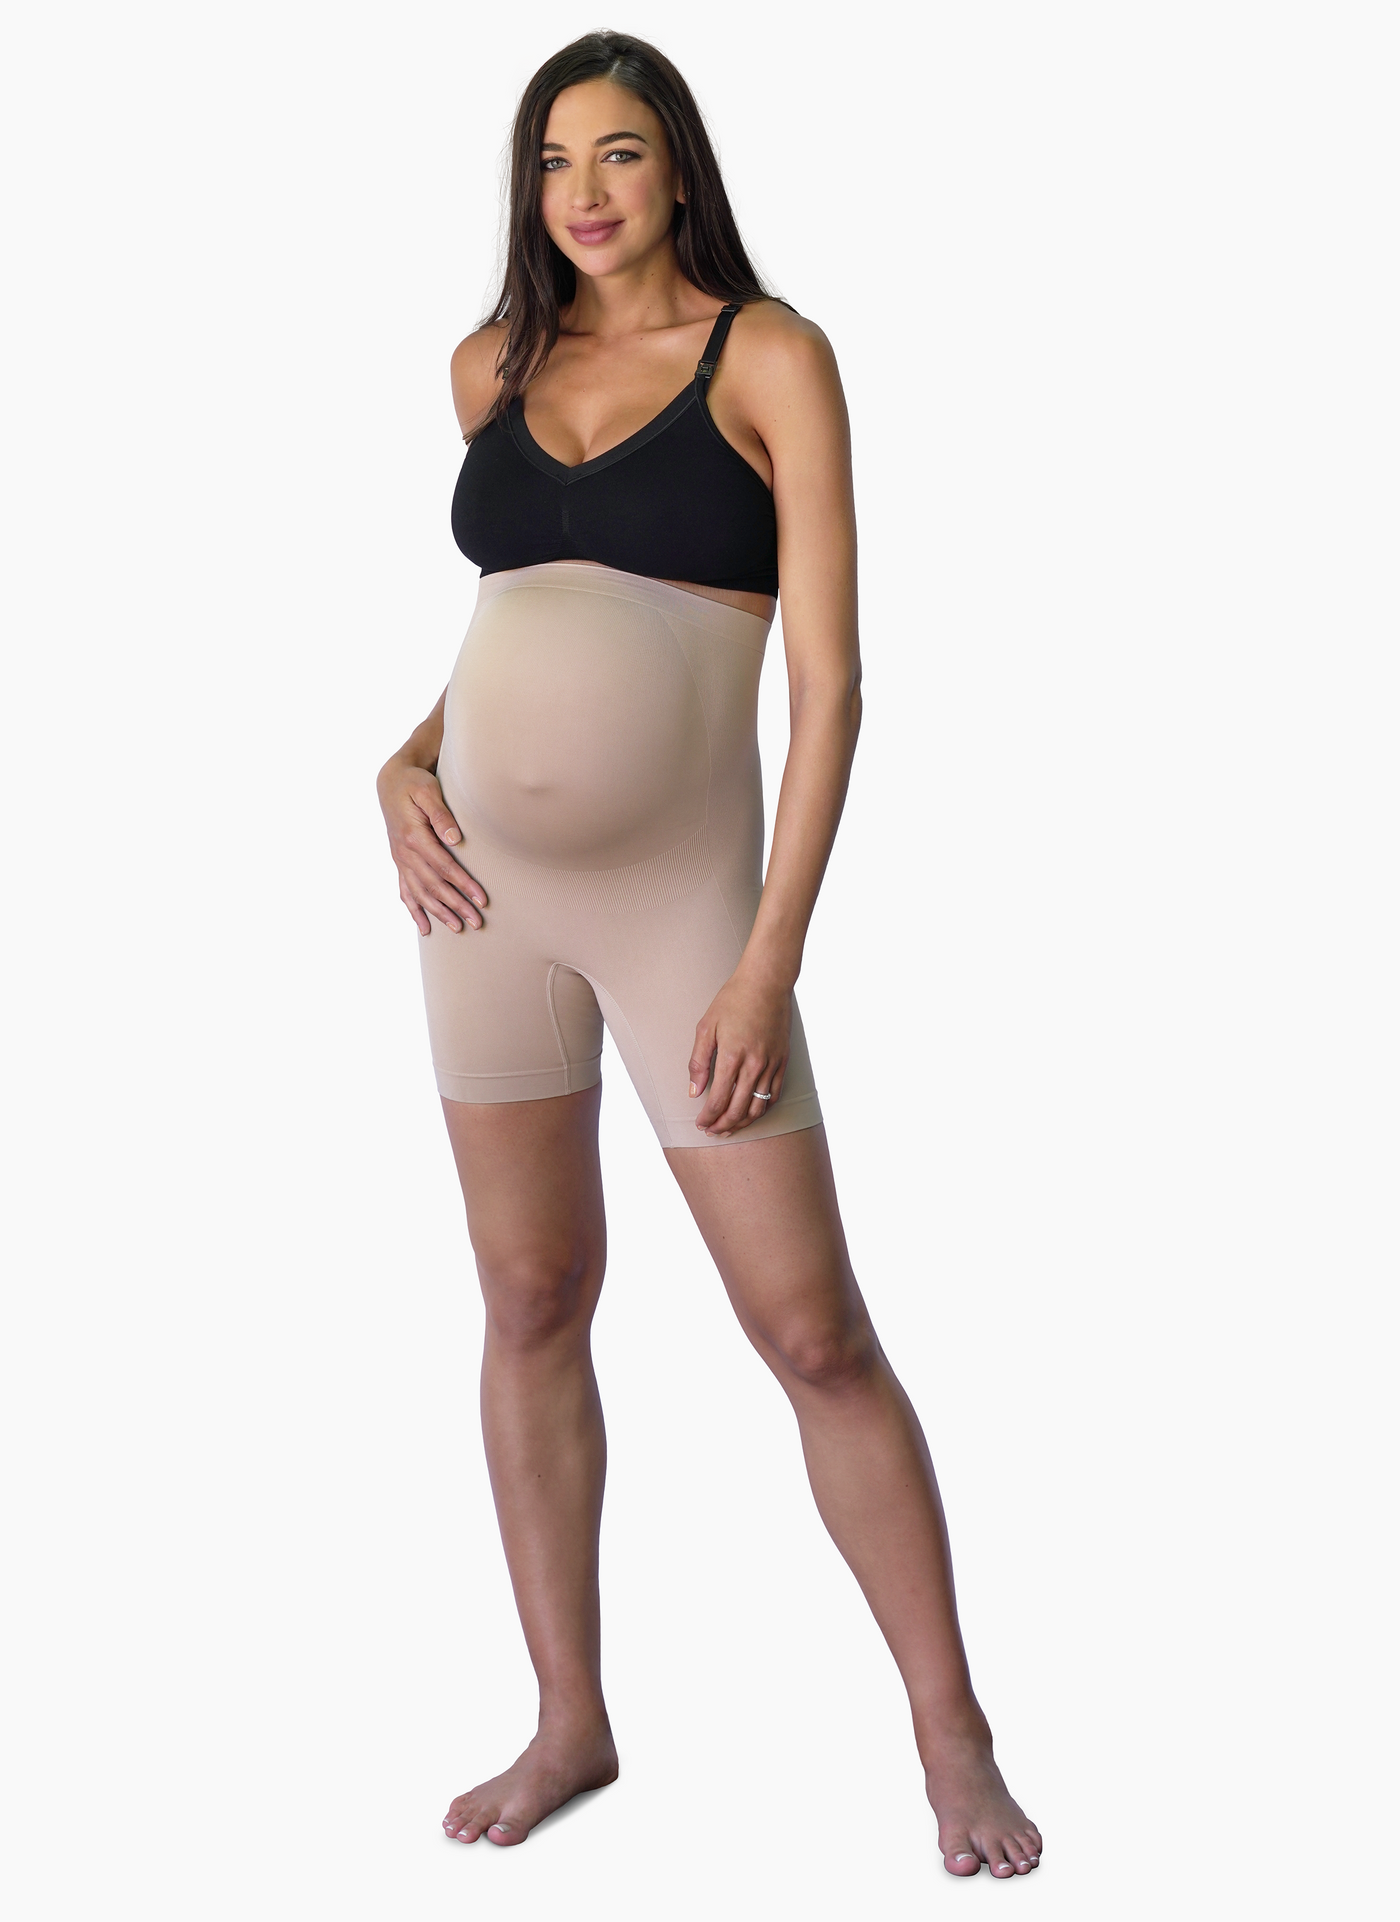 Narcissus Maternity Shapewear Gown Pregnancy Shorts Pettipants for